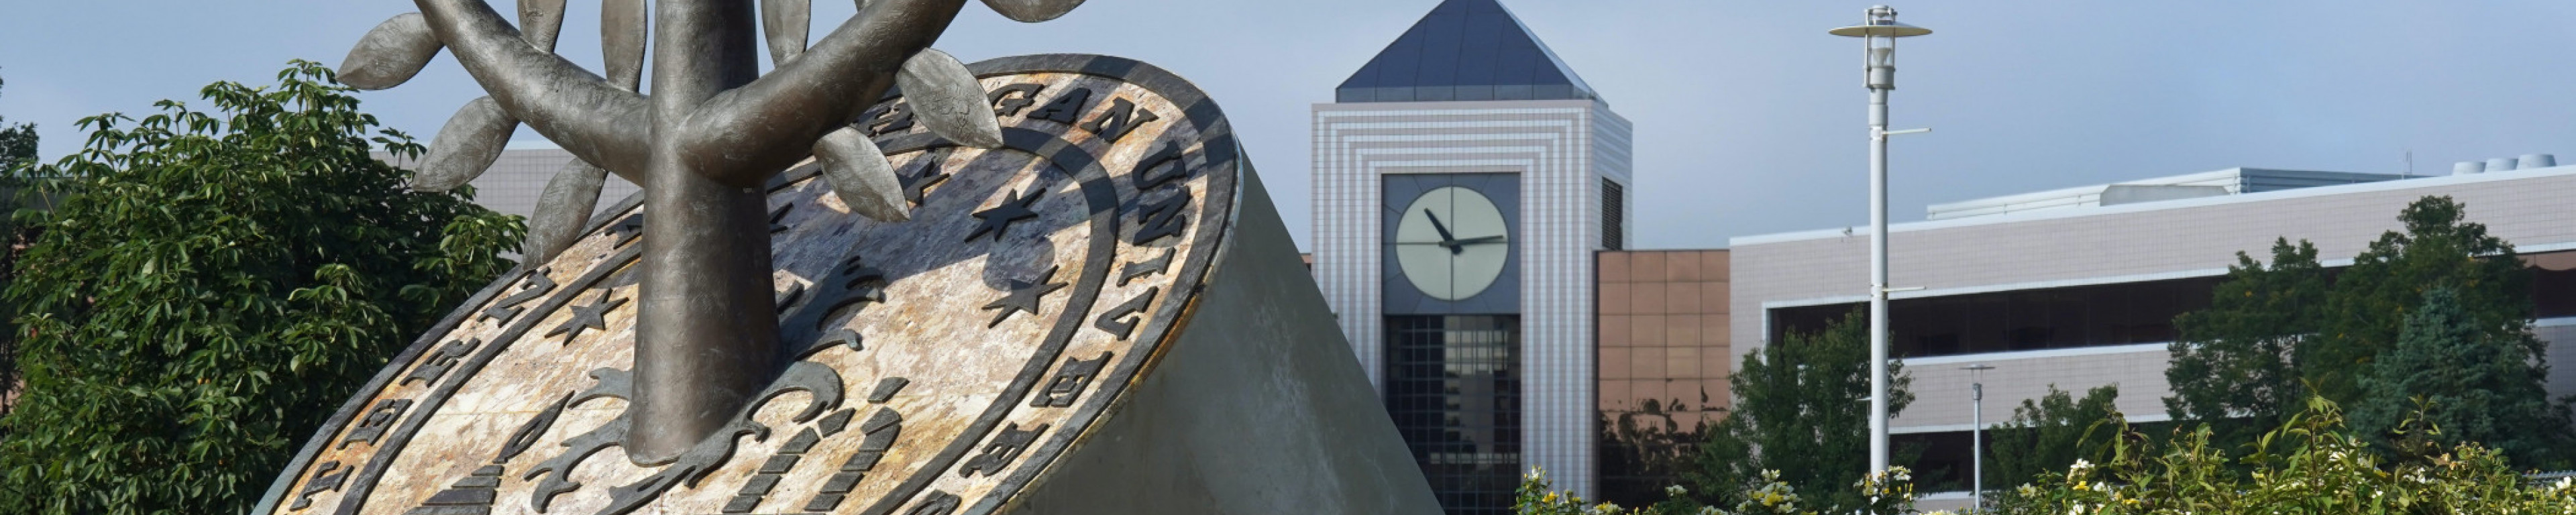 WMU seal in the foreground and Stewart tower in the background.